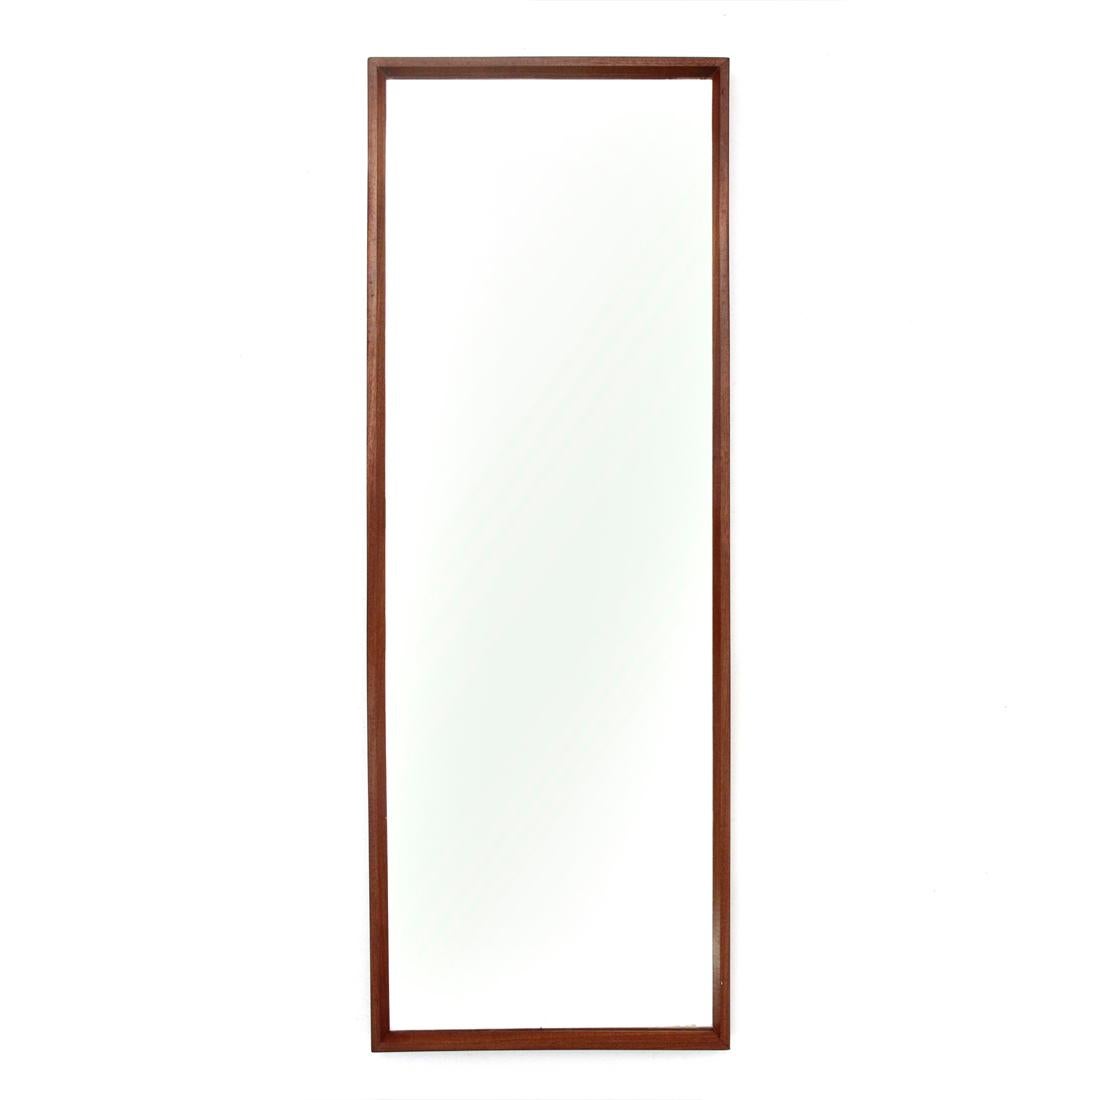 Italian manufacturing mirror produced in the 1960s.
Solid teak frame.
Mirrored glass.
Structure in good condition, some signs due to normal use over time.

Dimensions: Length 43 cm, depth 4 cm, height 117.5 cm.